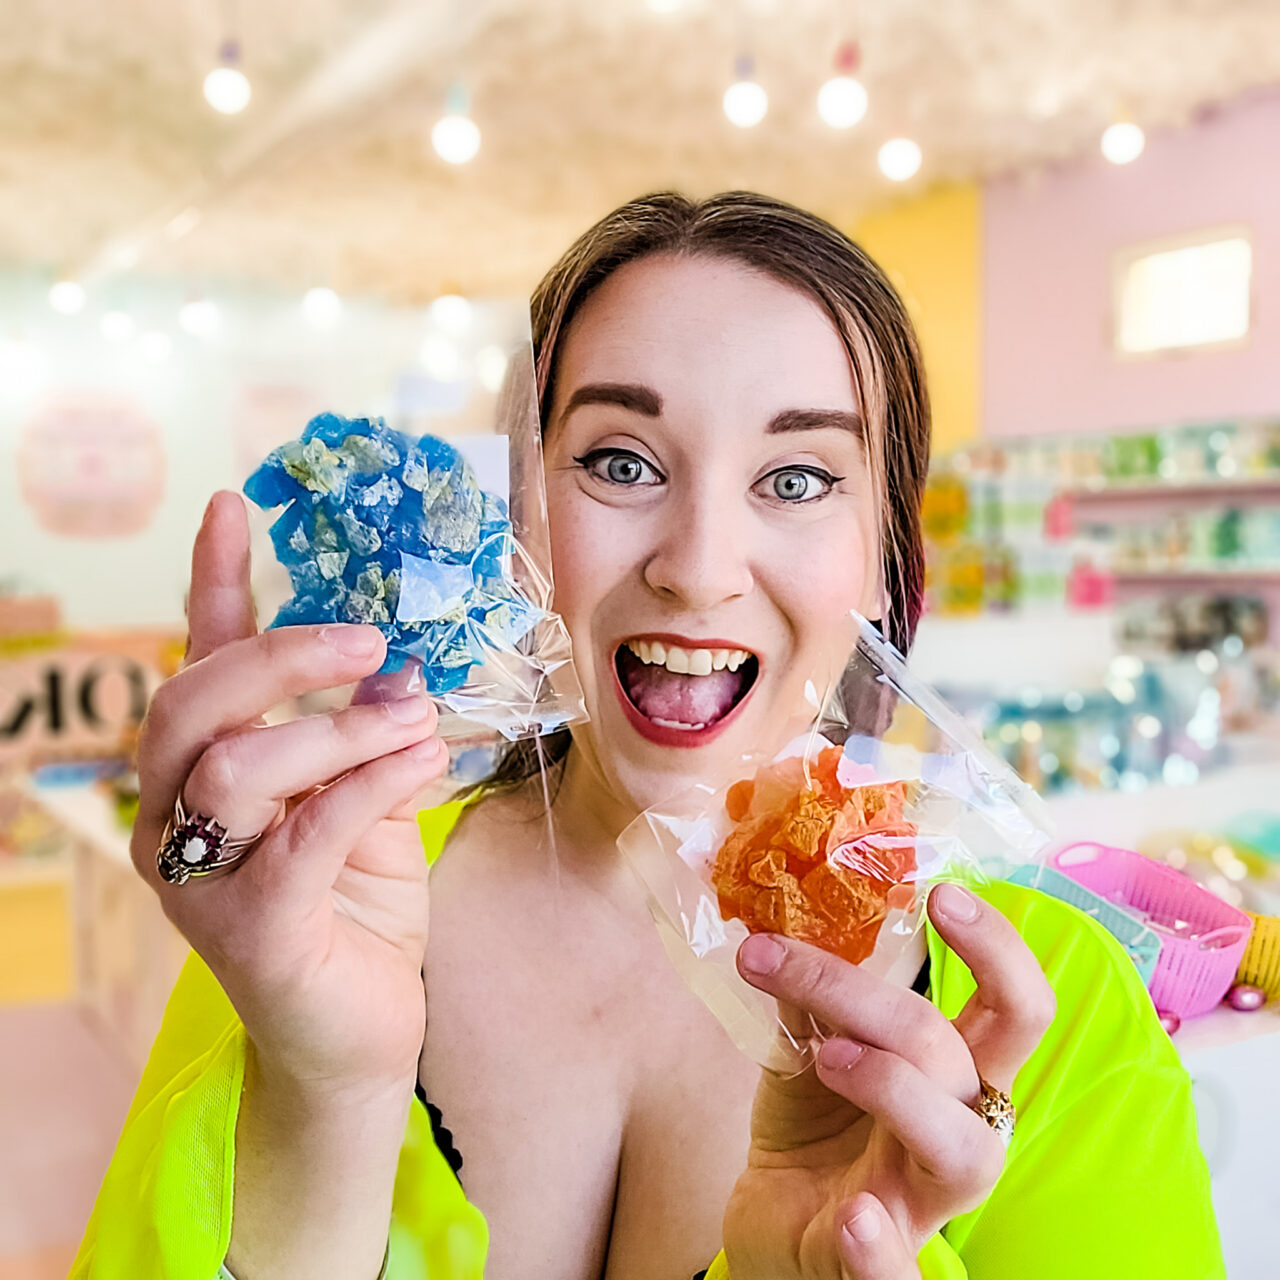 Owner Polly smiling holding two bags of candy, in brightly coloured store front.